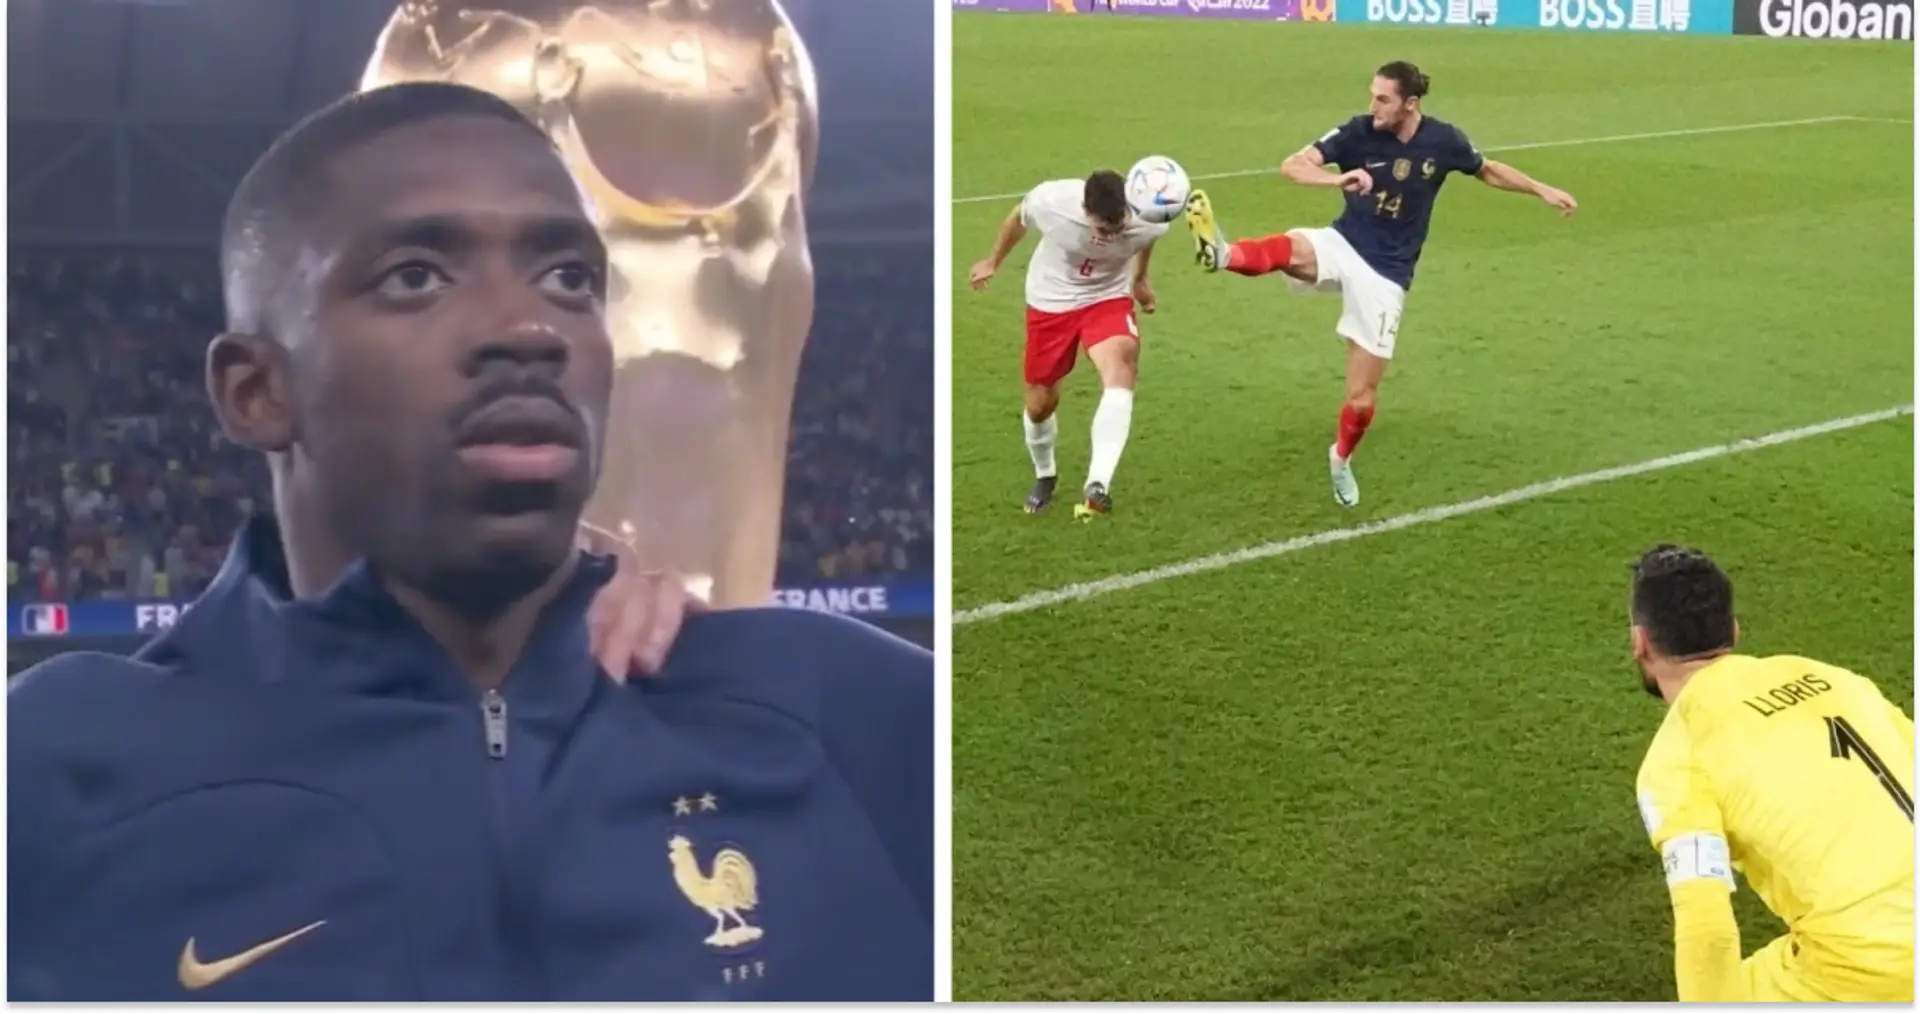 Dembele and Kounde qualify for World Cup playoffs, Christensen scores: how Barca players fared in France vs Denmark